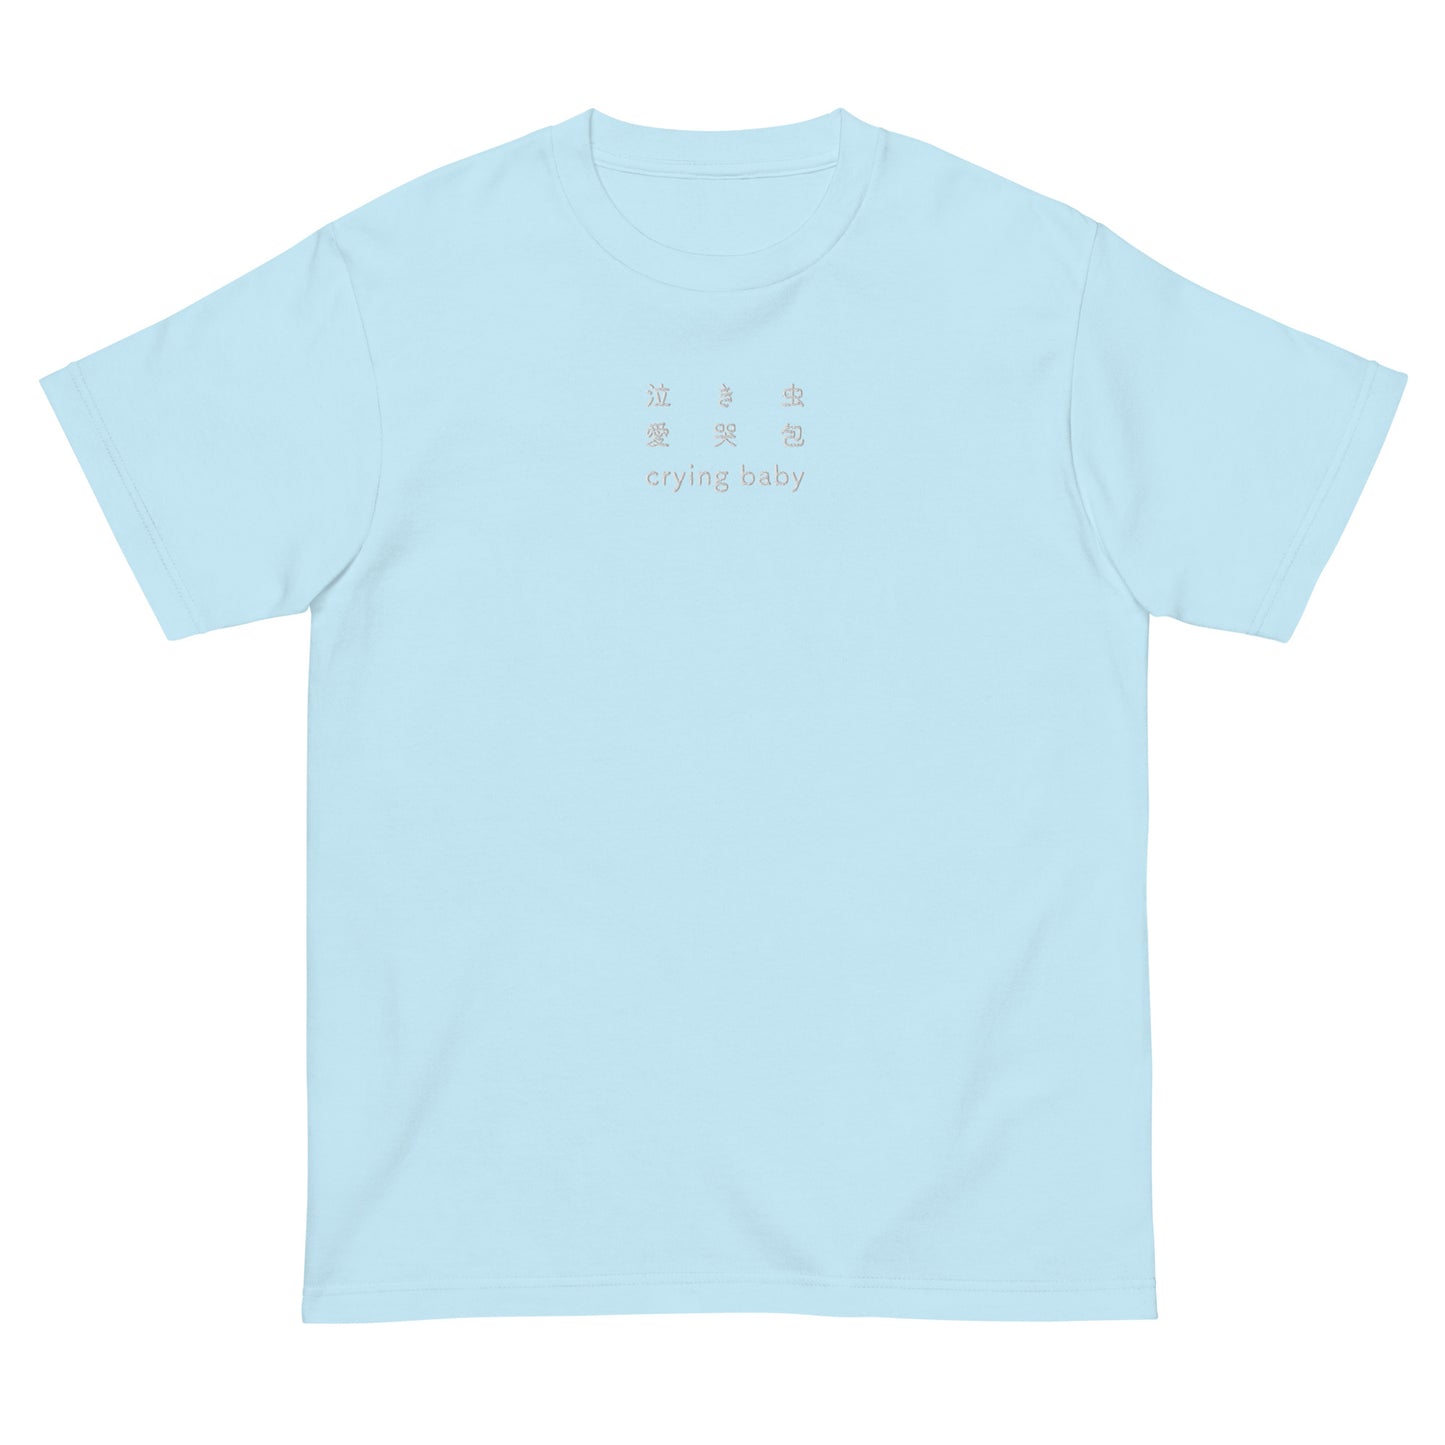 Light Blue High Quality Tee - Front Design with an White Embroidery "Crying Baby" in Japanese,Chinese and English